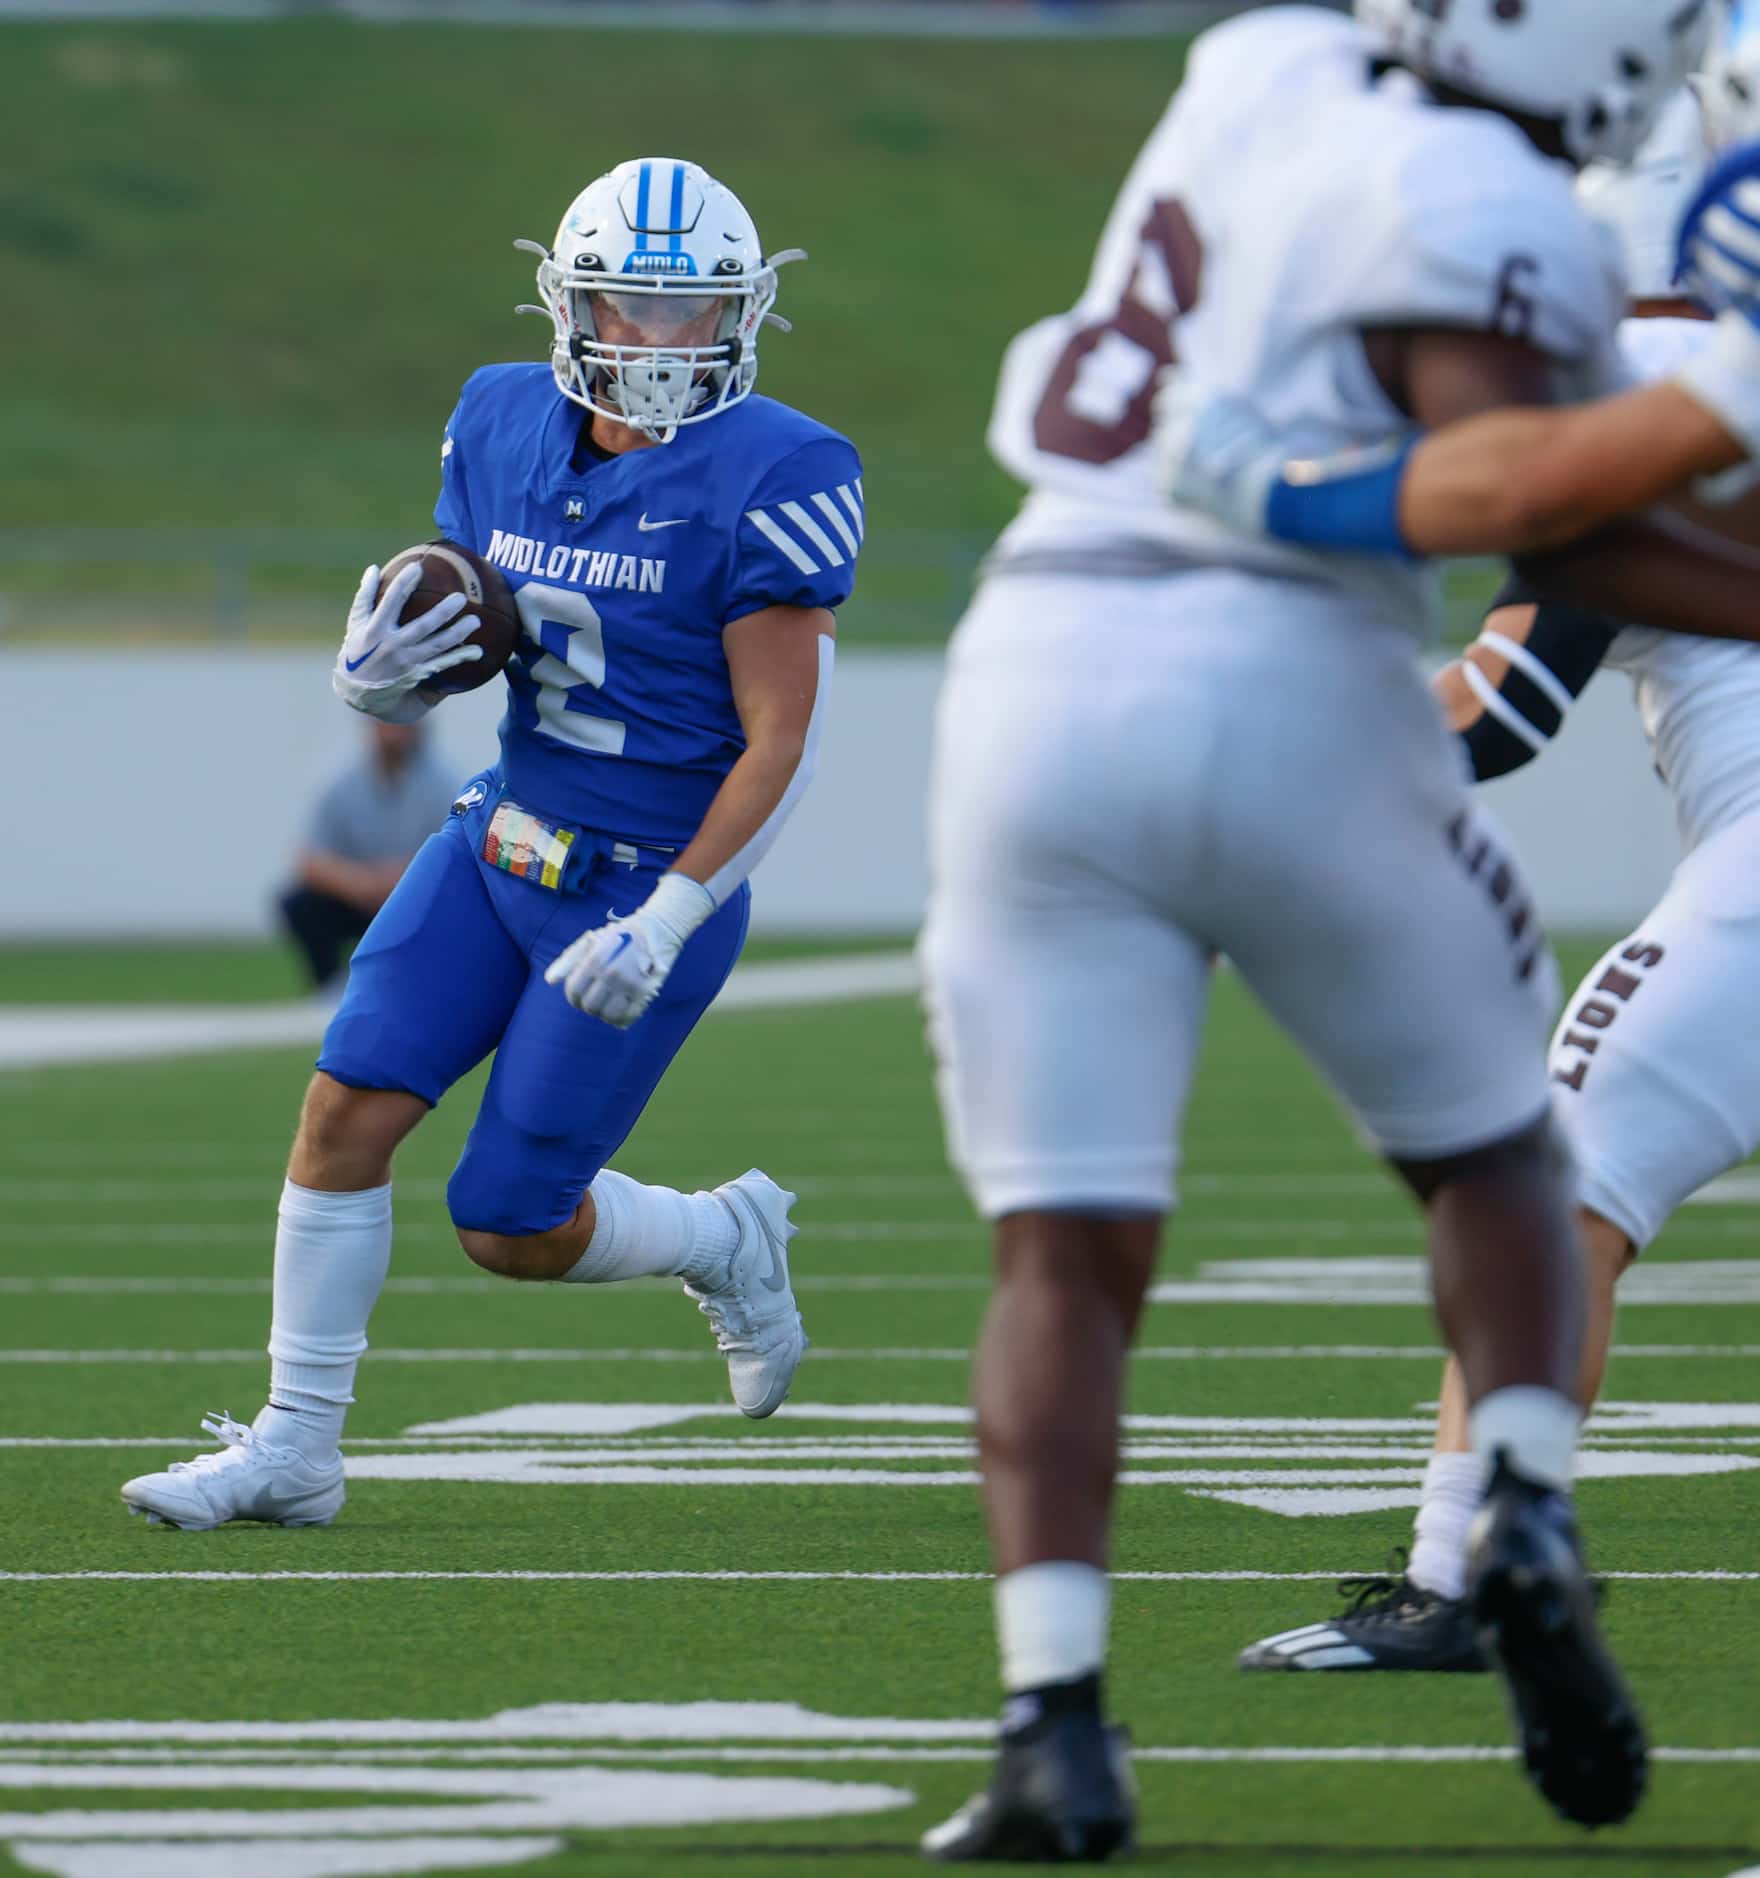 Midlothian high’s Slater Callahan (2) runs with the ball during a football game against...